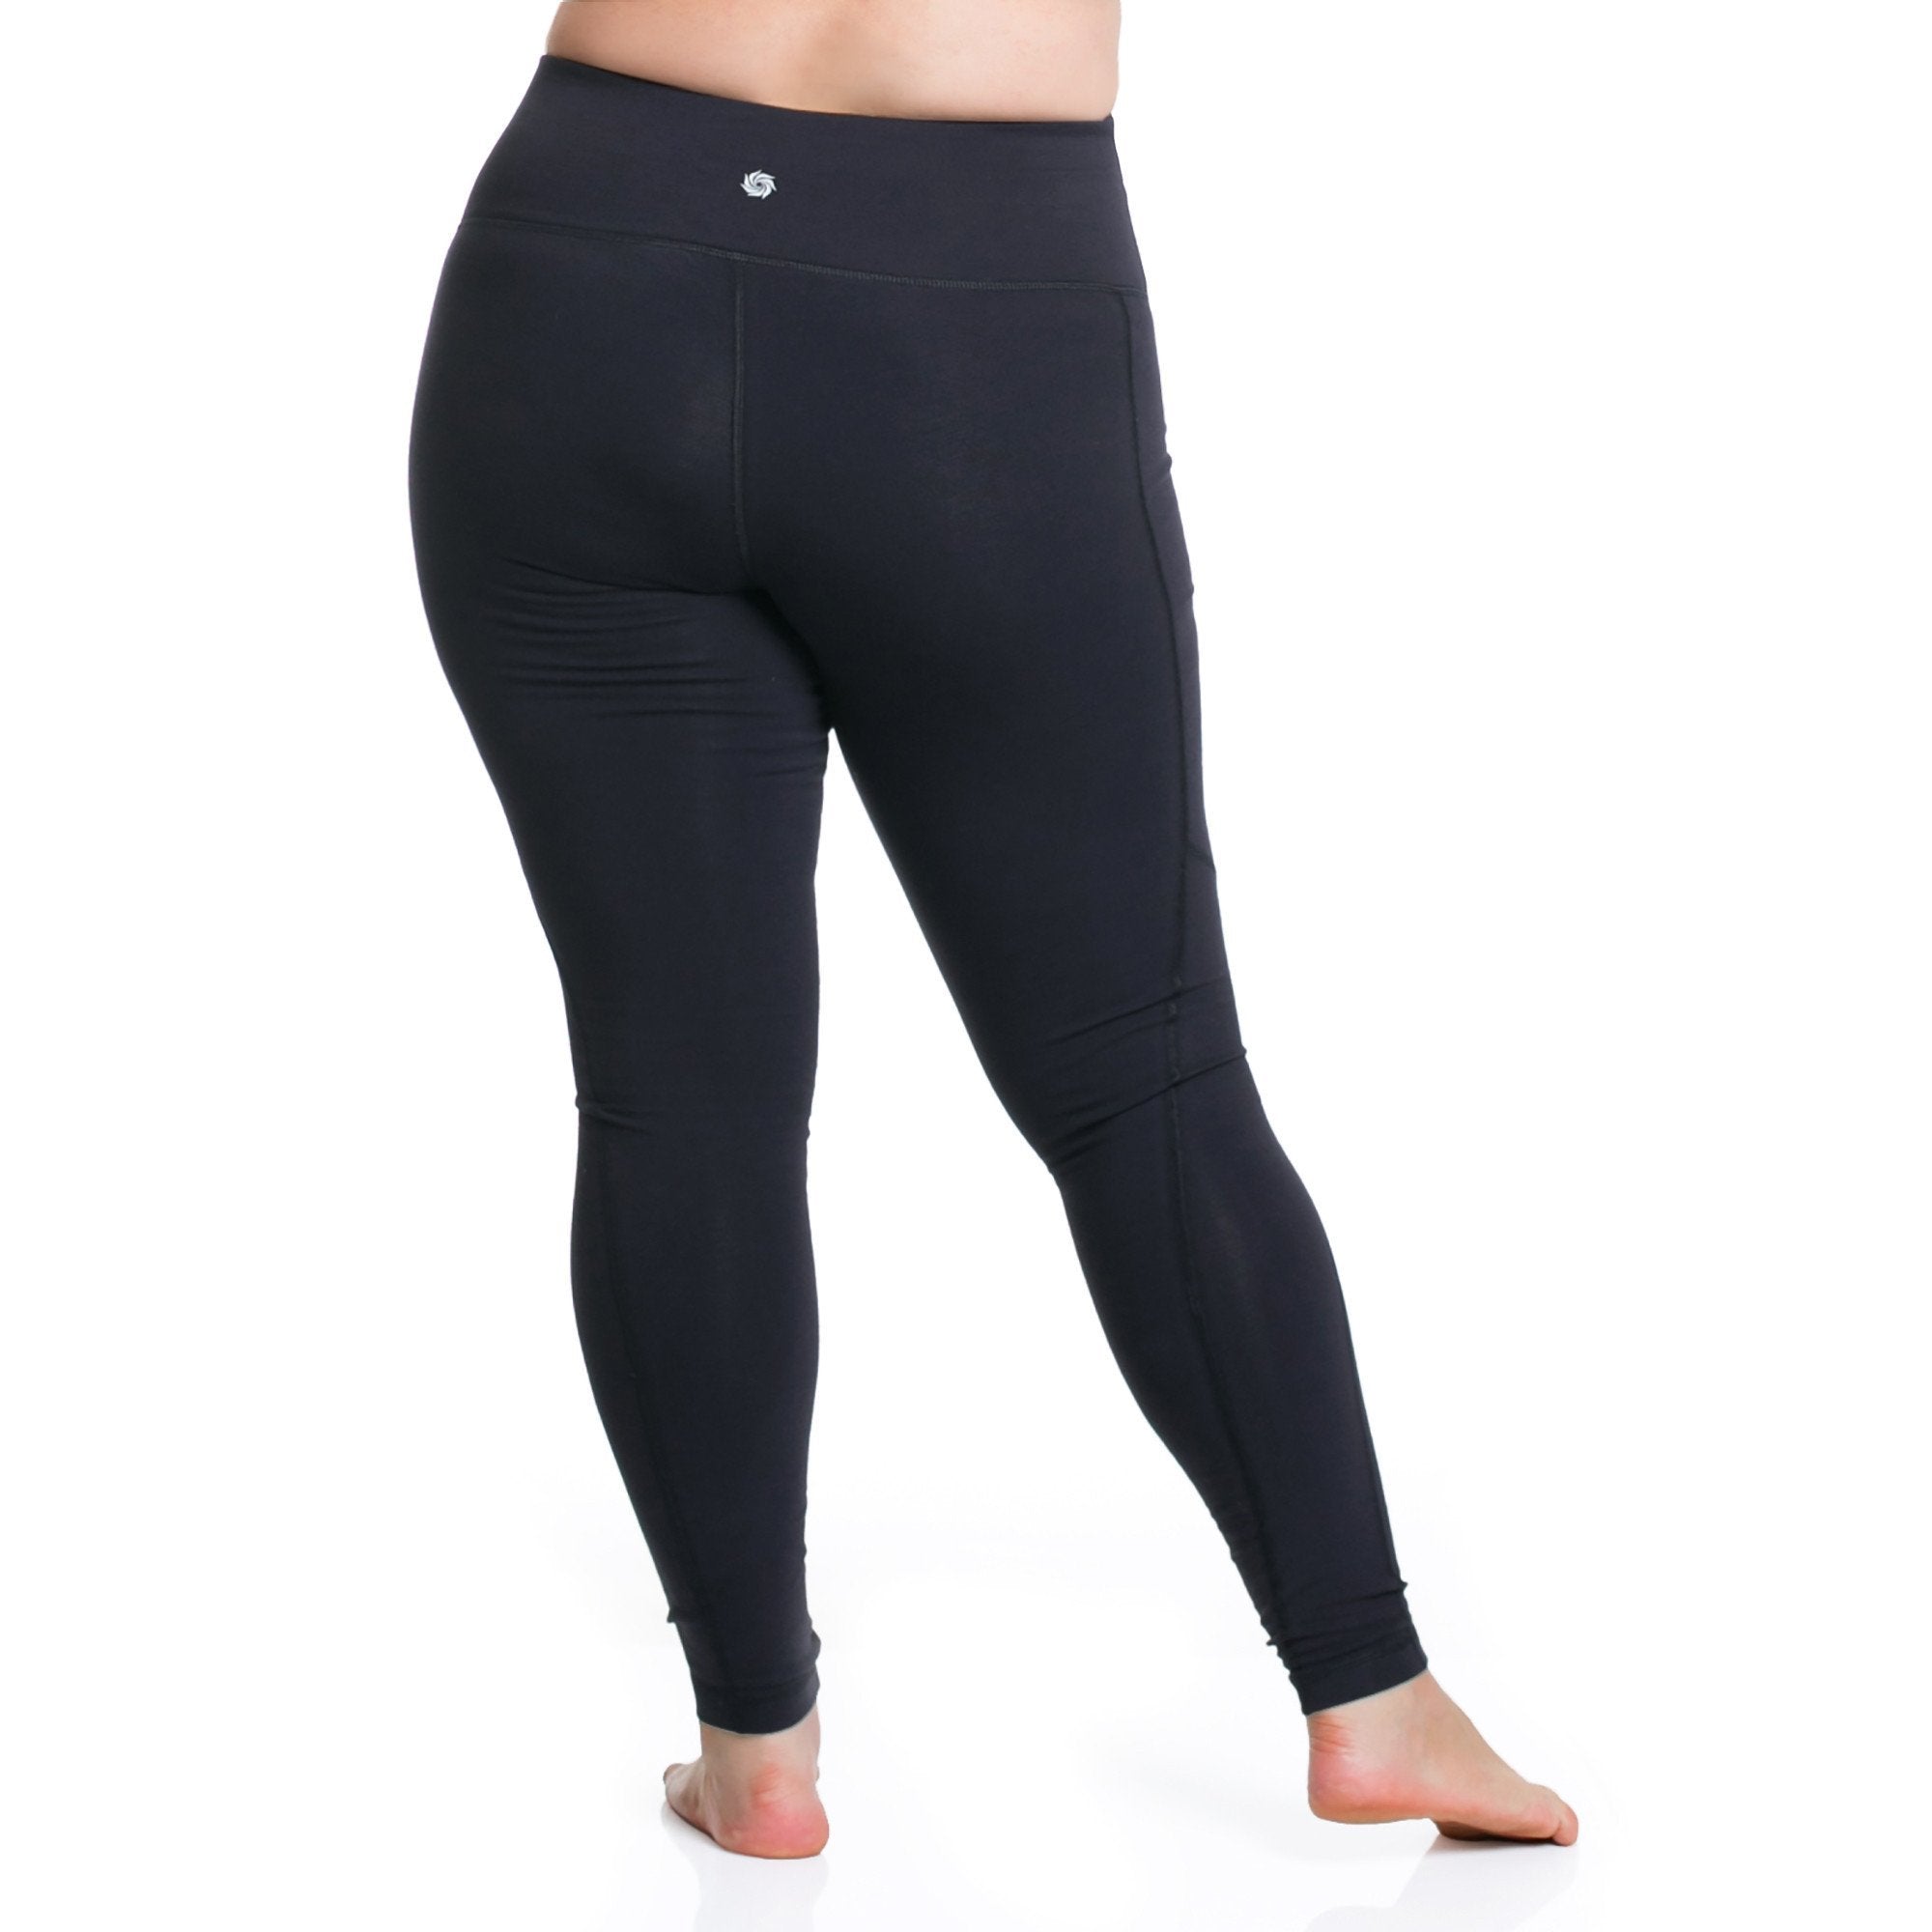 Buy Dragon Fit Compression Yoga Pants with Inner Pockets in High Waist  Athletic Pants Tummy Control Stretch Workout Yoga Legging, Black-2 Inner  Pockets, X-Small at Amazon.in